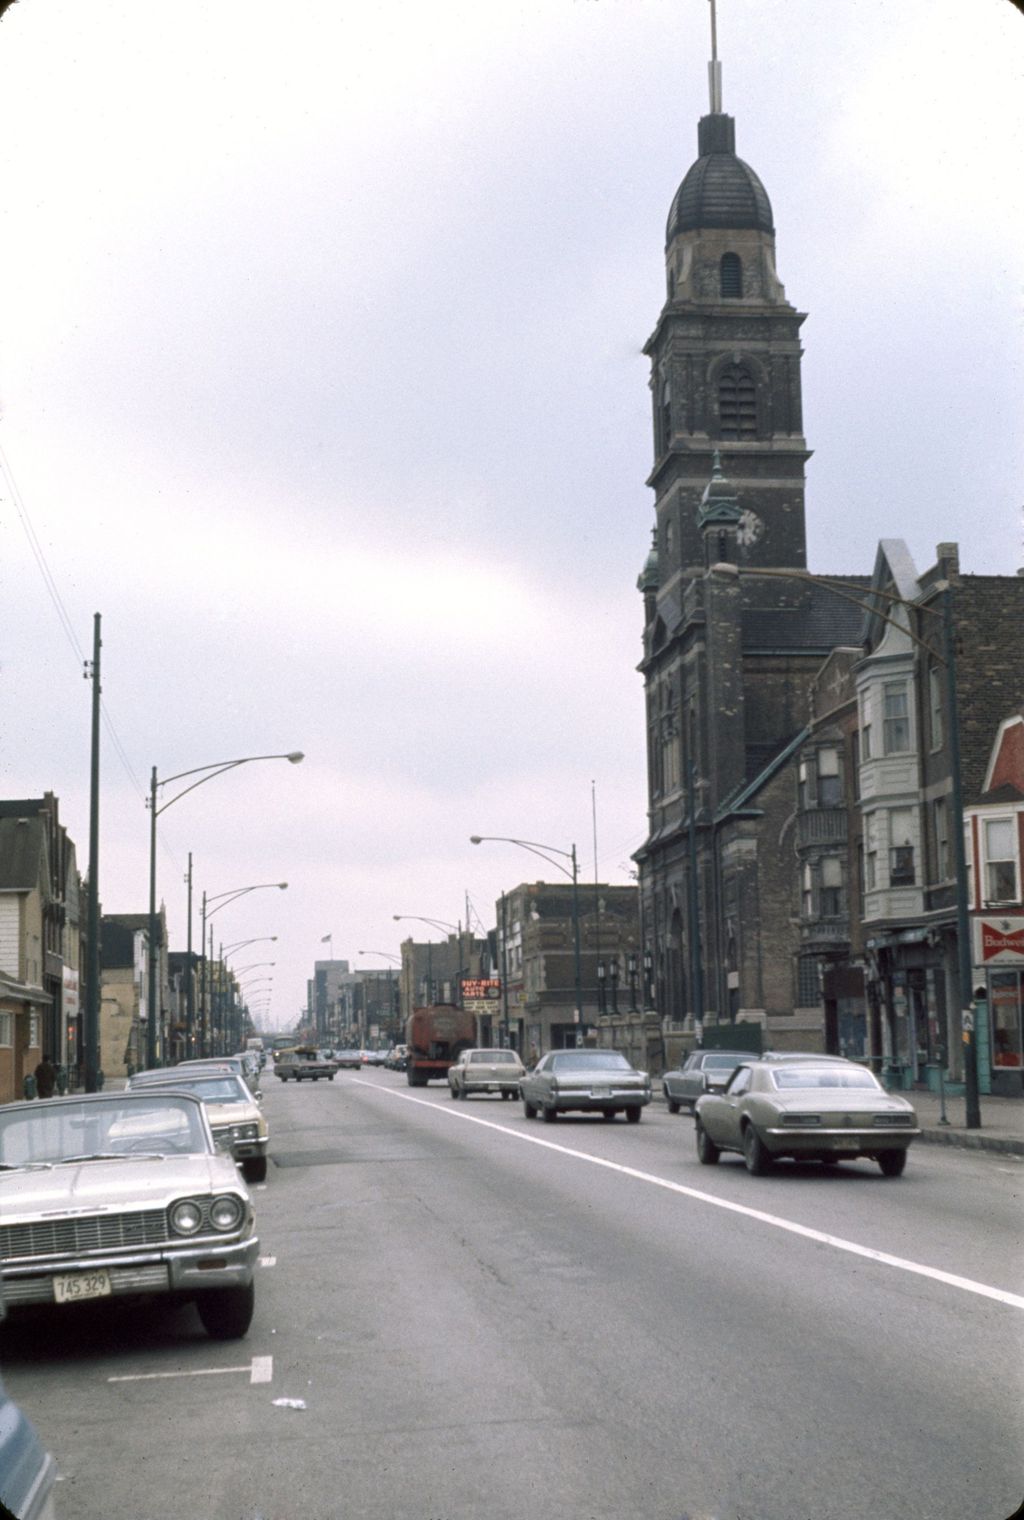 South Commercial Avenue and Immaculate Conception Church